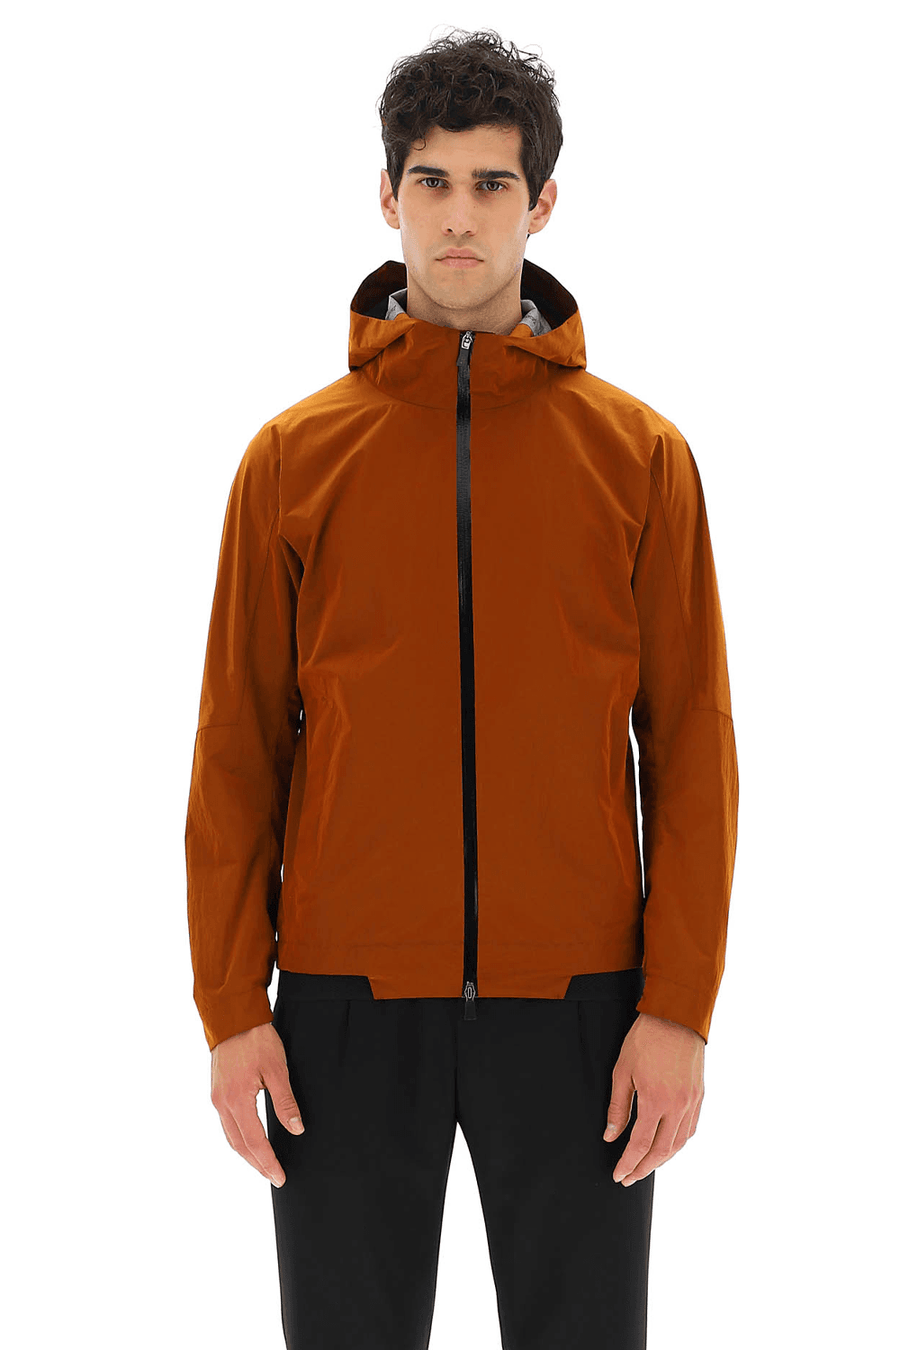 Buy the Herno Relaxed Opalescent Laminar Bomber Jacket in Orange at Intro. Spend £50 for free UK delivery. Official stockists. We ship worldwide.